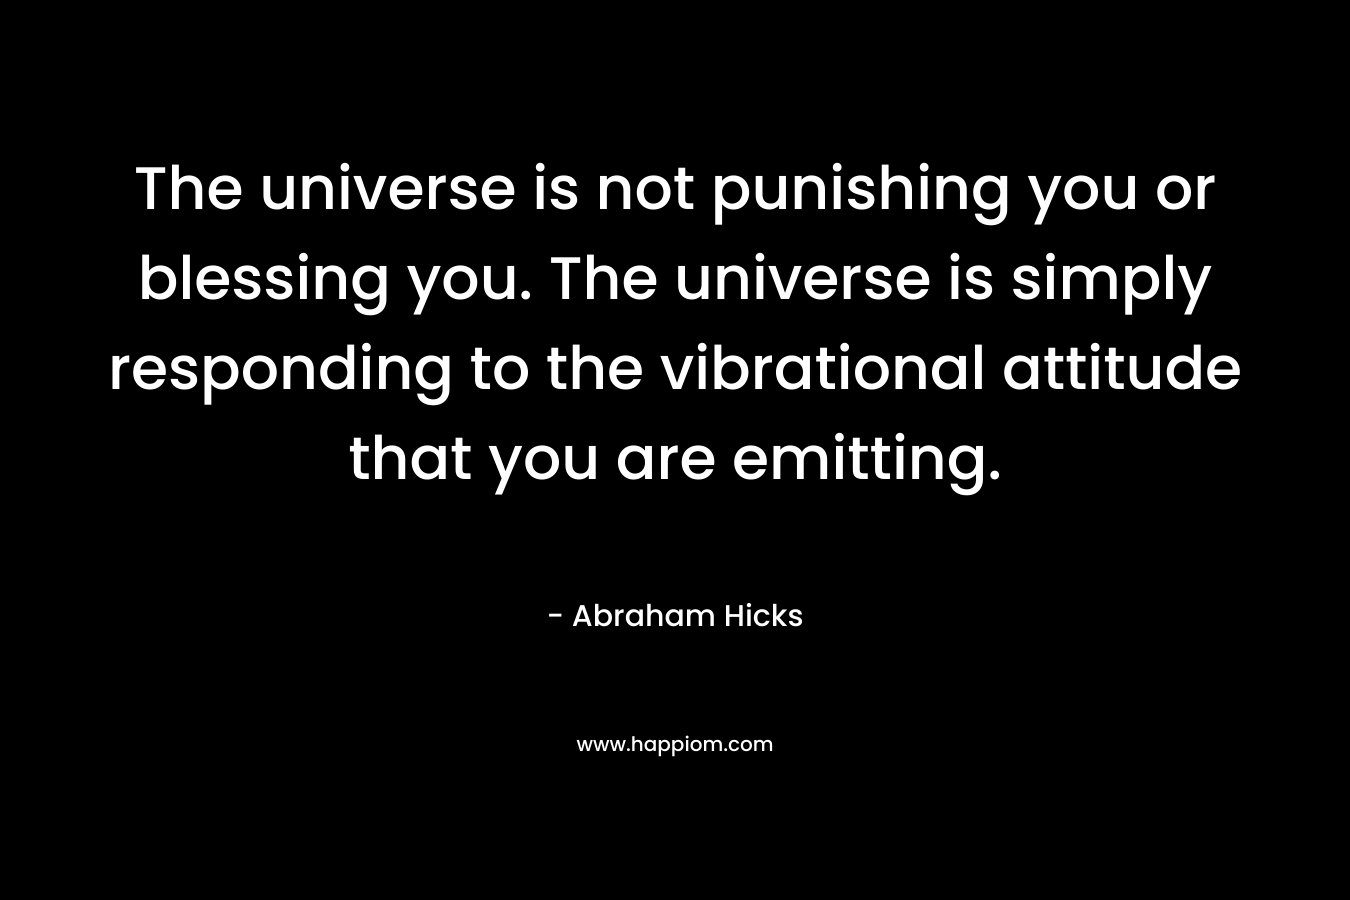 The universe is not punishing you or blessing you. The universe is simply responding to the vibrational attitude that you are emitting.